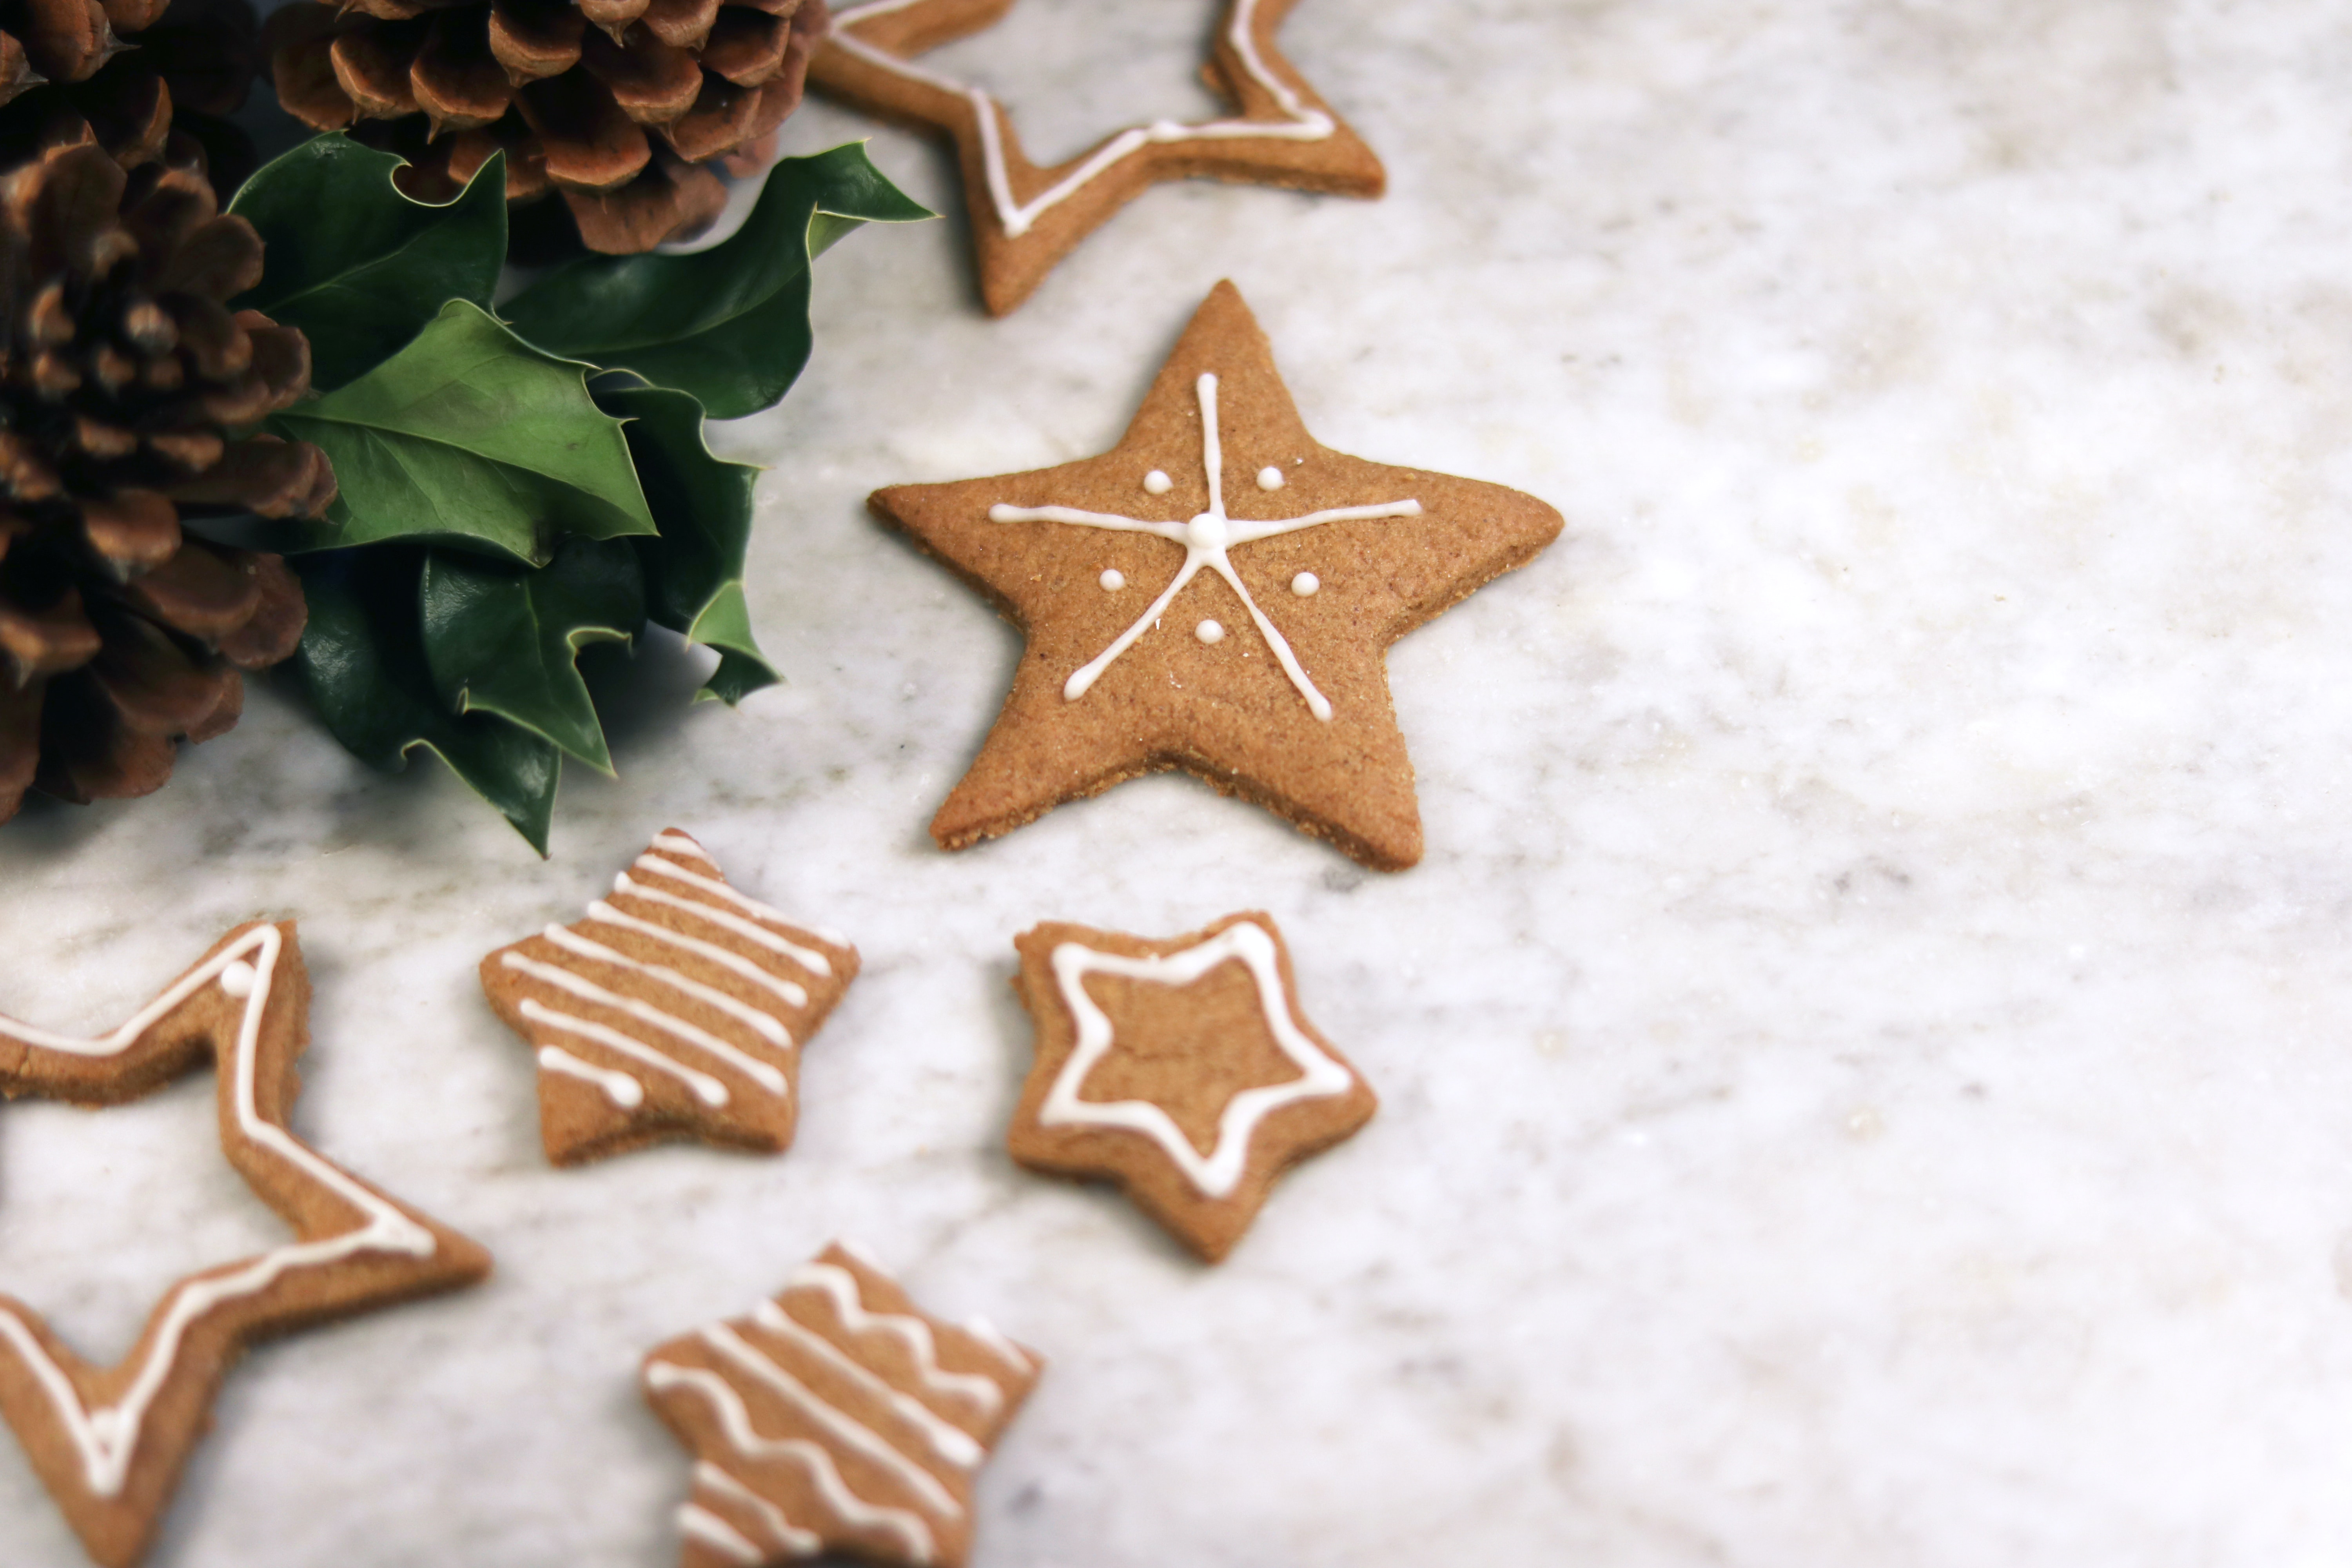 Sell baked goods as a holiday fundraising idea